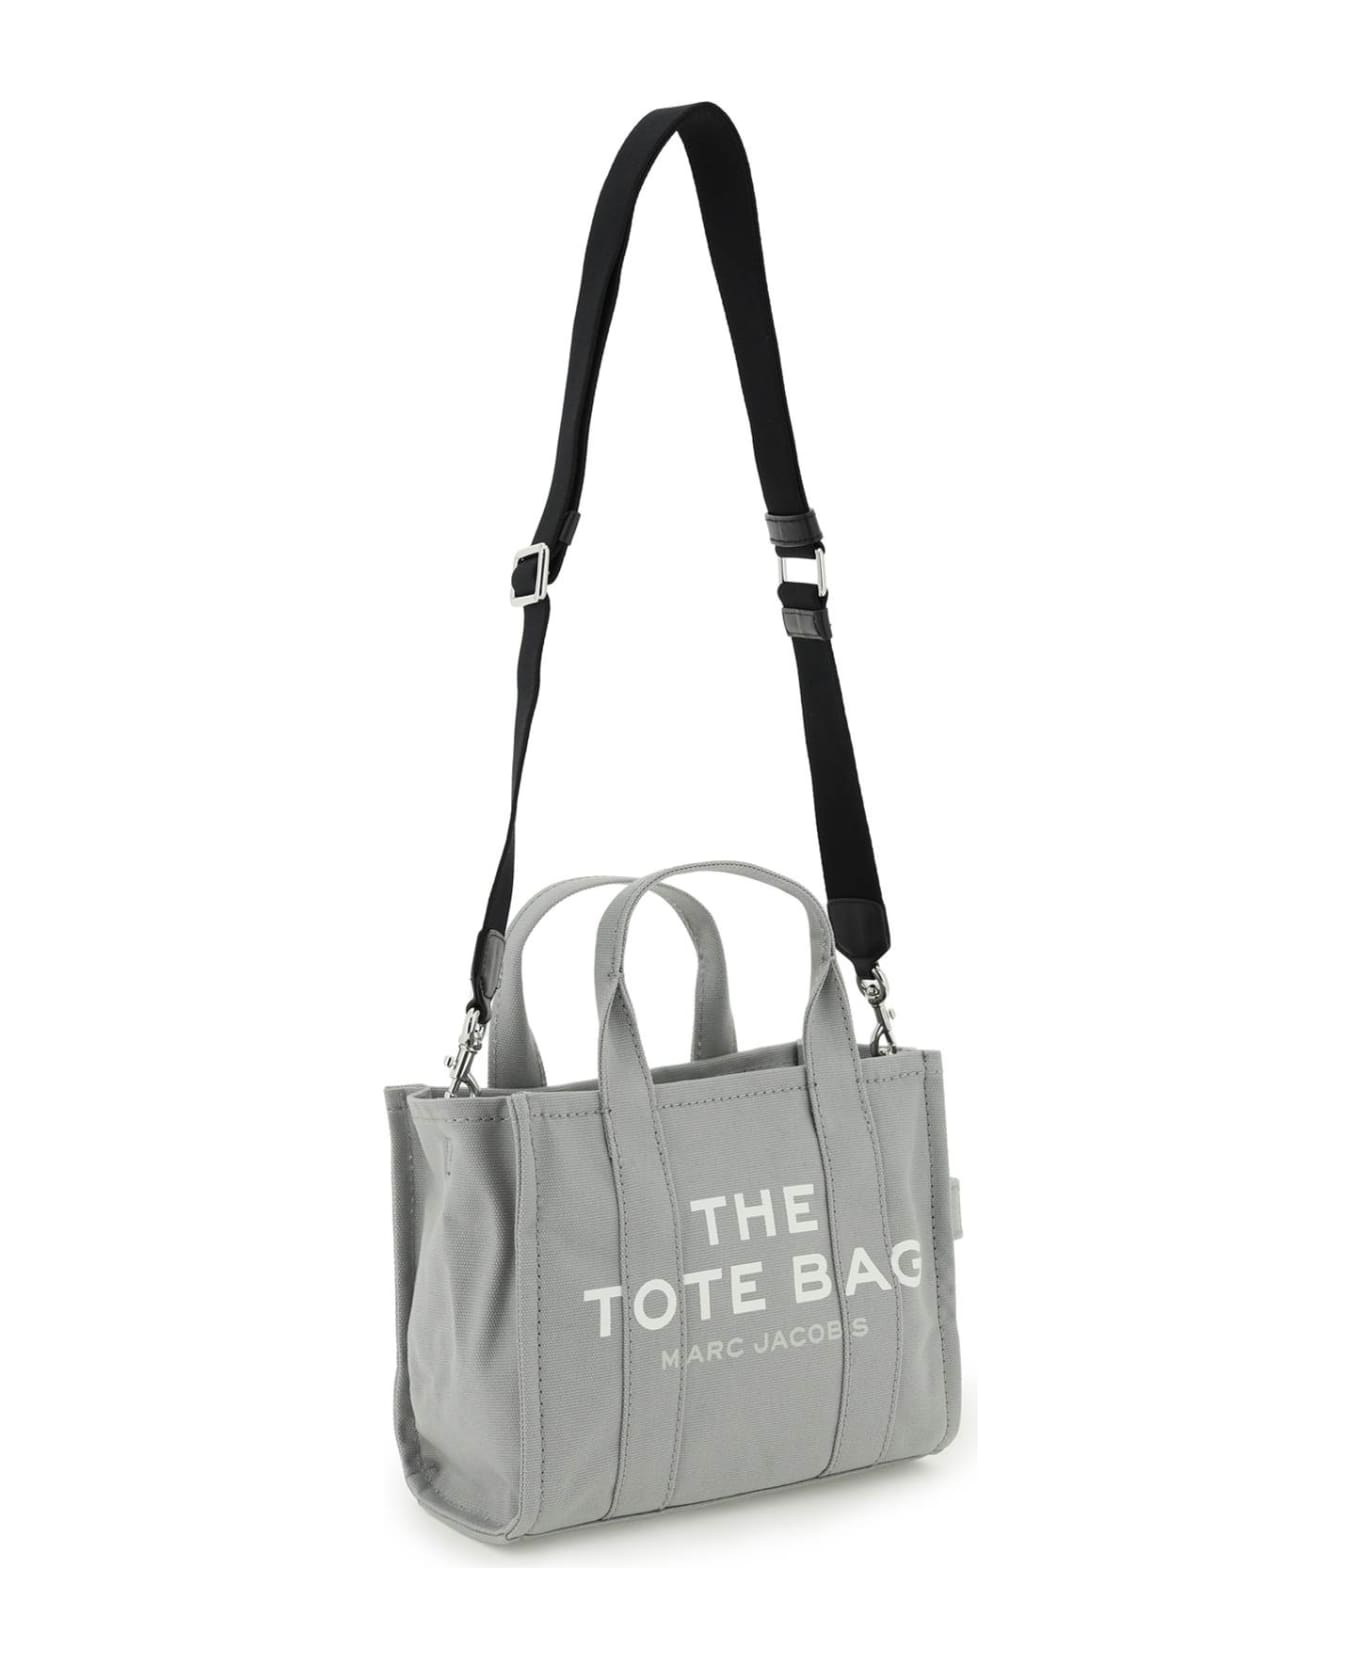 Marc Jacobs The Tote Bag Mini Tote - Grey トートバッグ